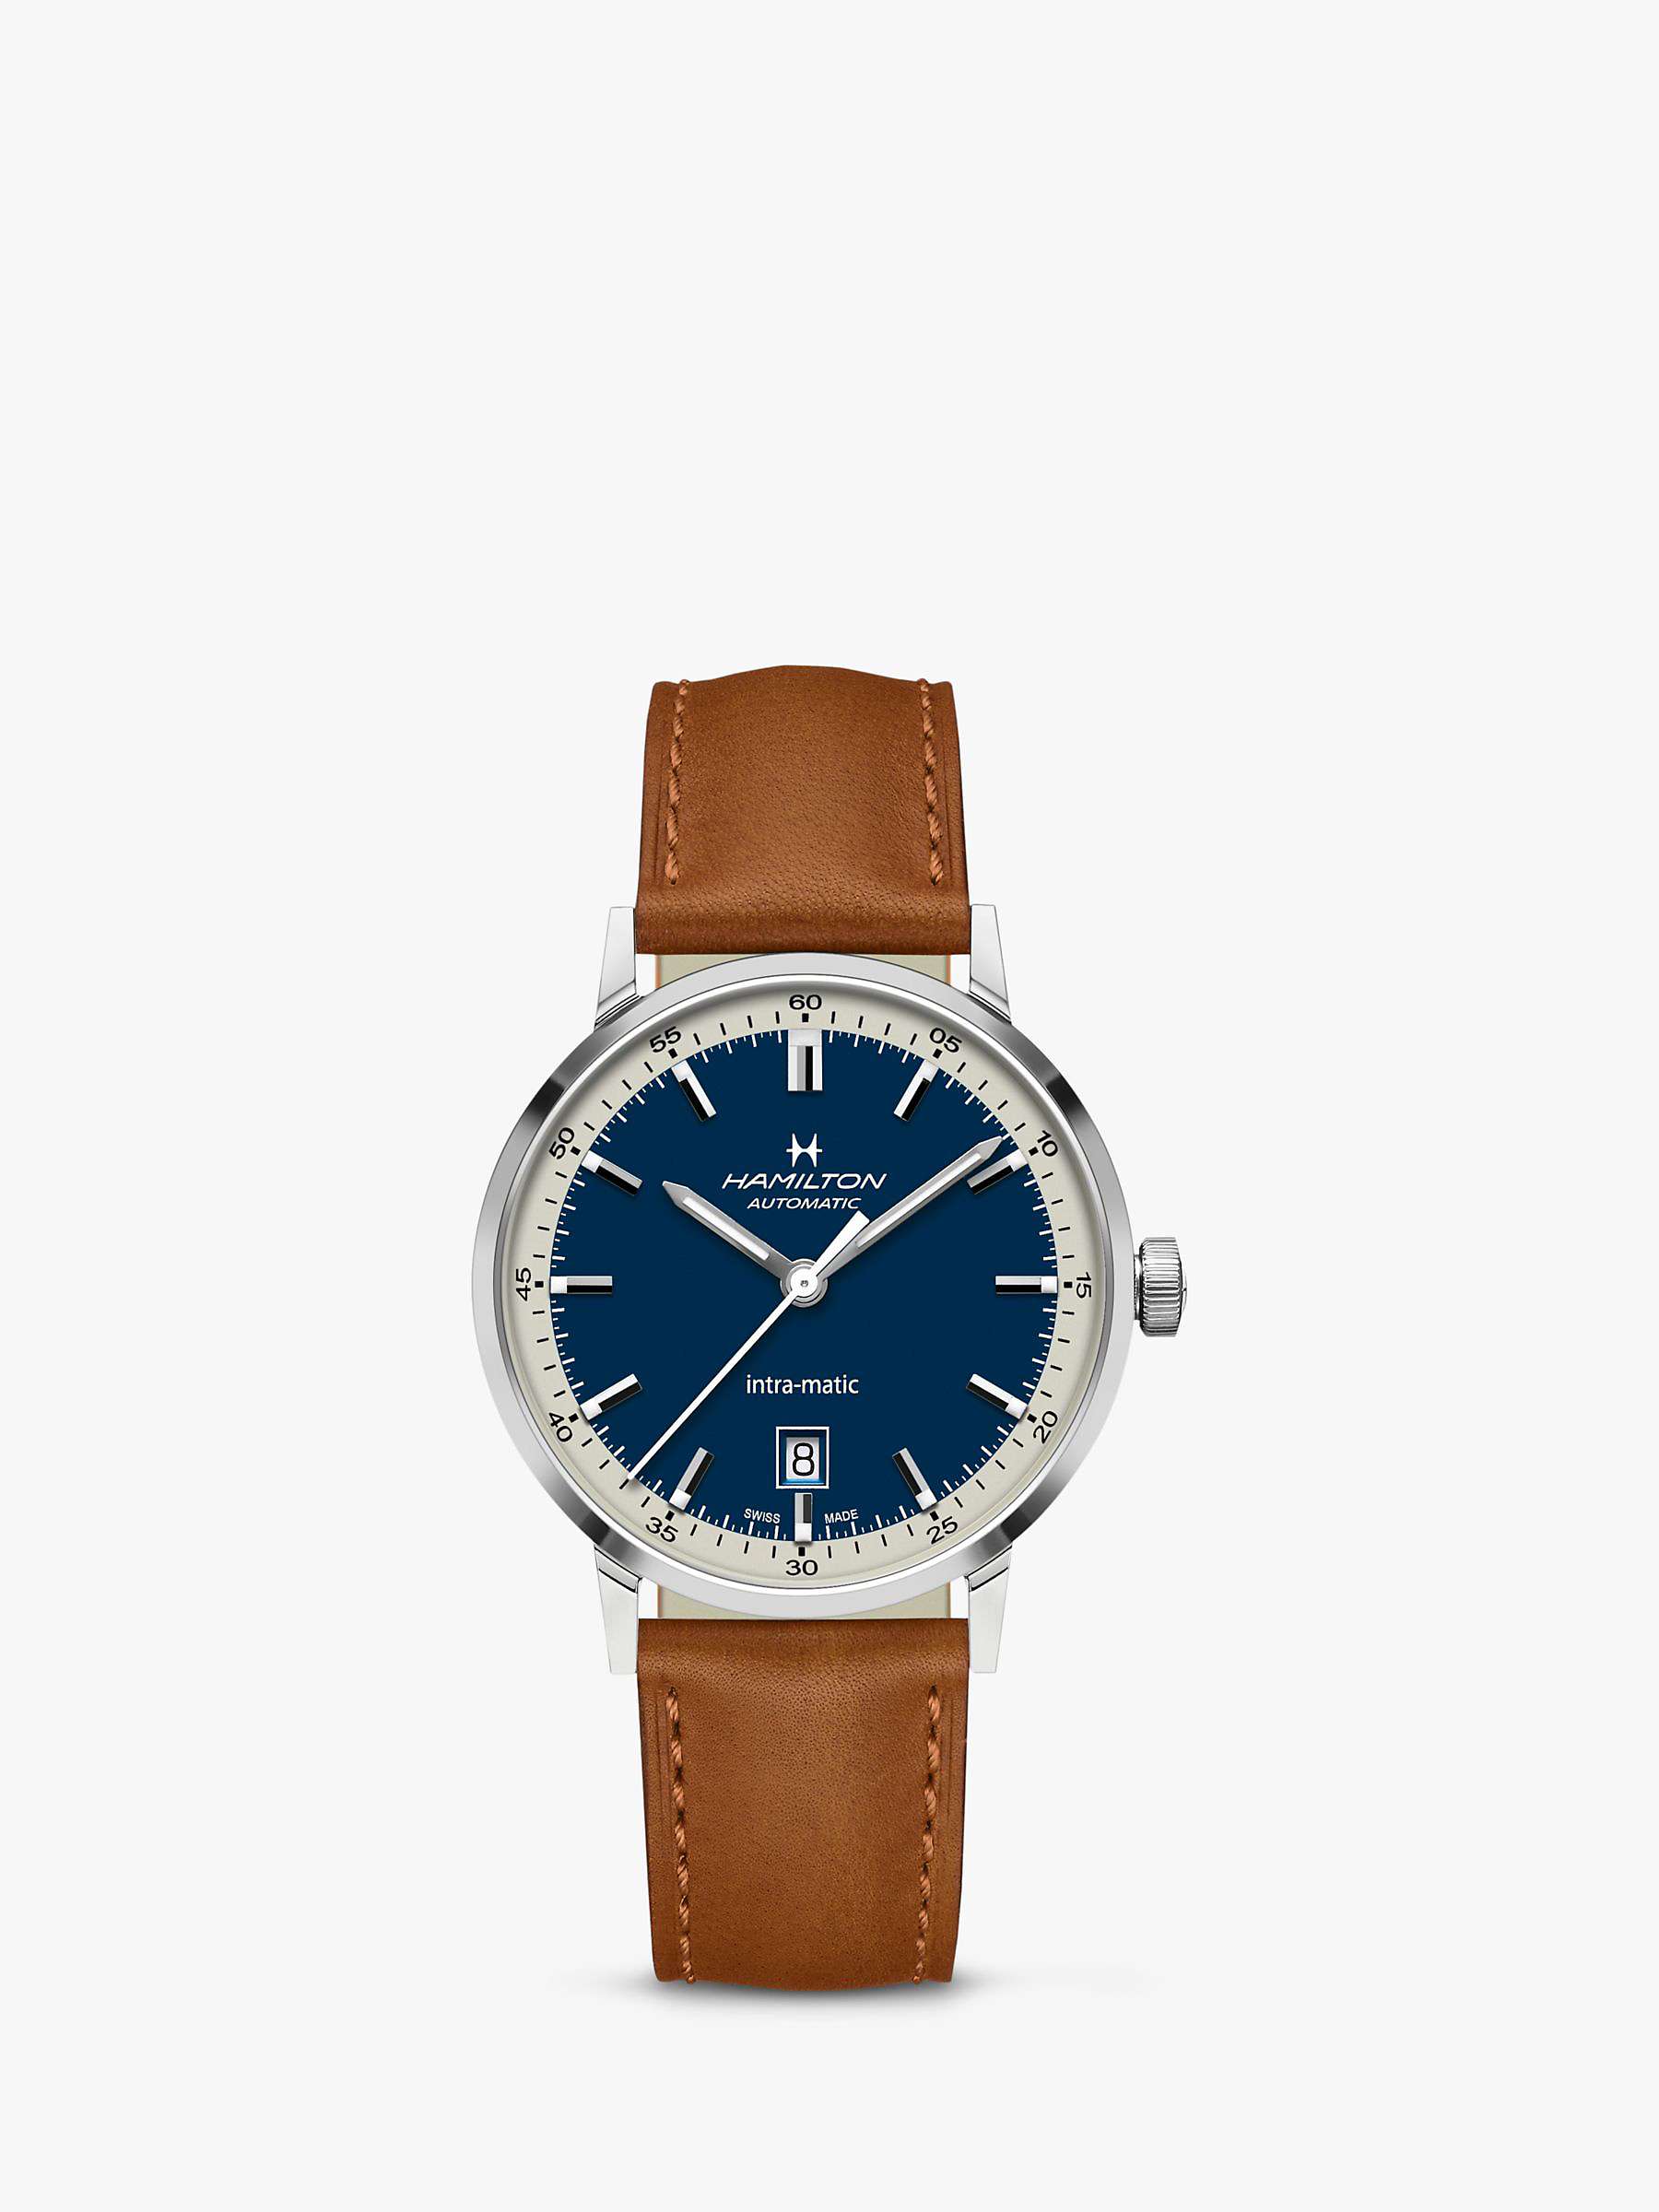 Buy Hamilton H38425540 Men's American Classic Automatic Date Leather Strap Watch, Brown/Blue Online at johnlewis.com